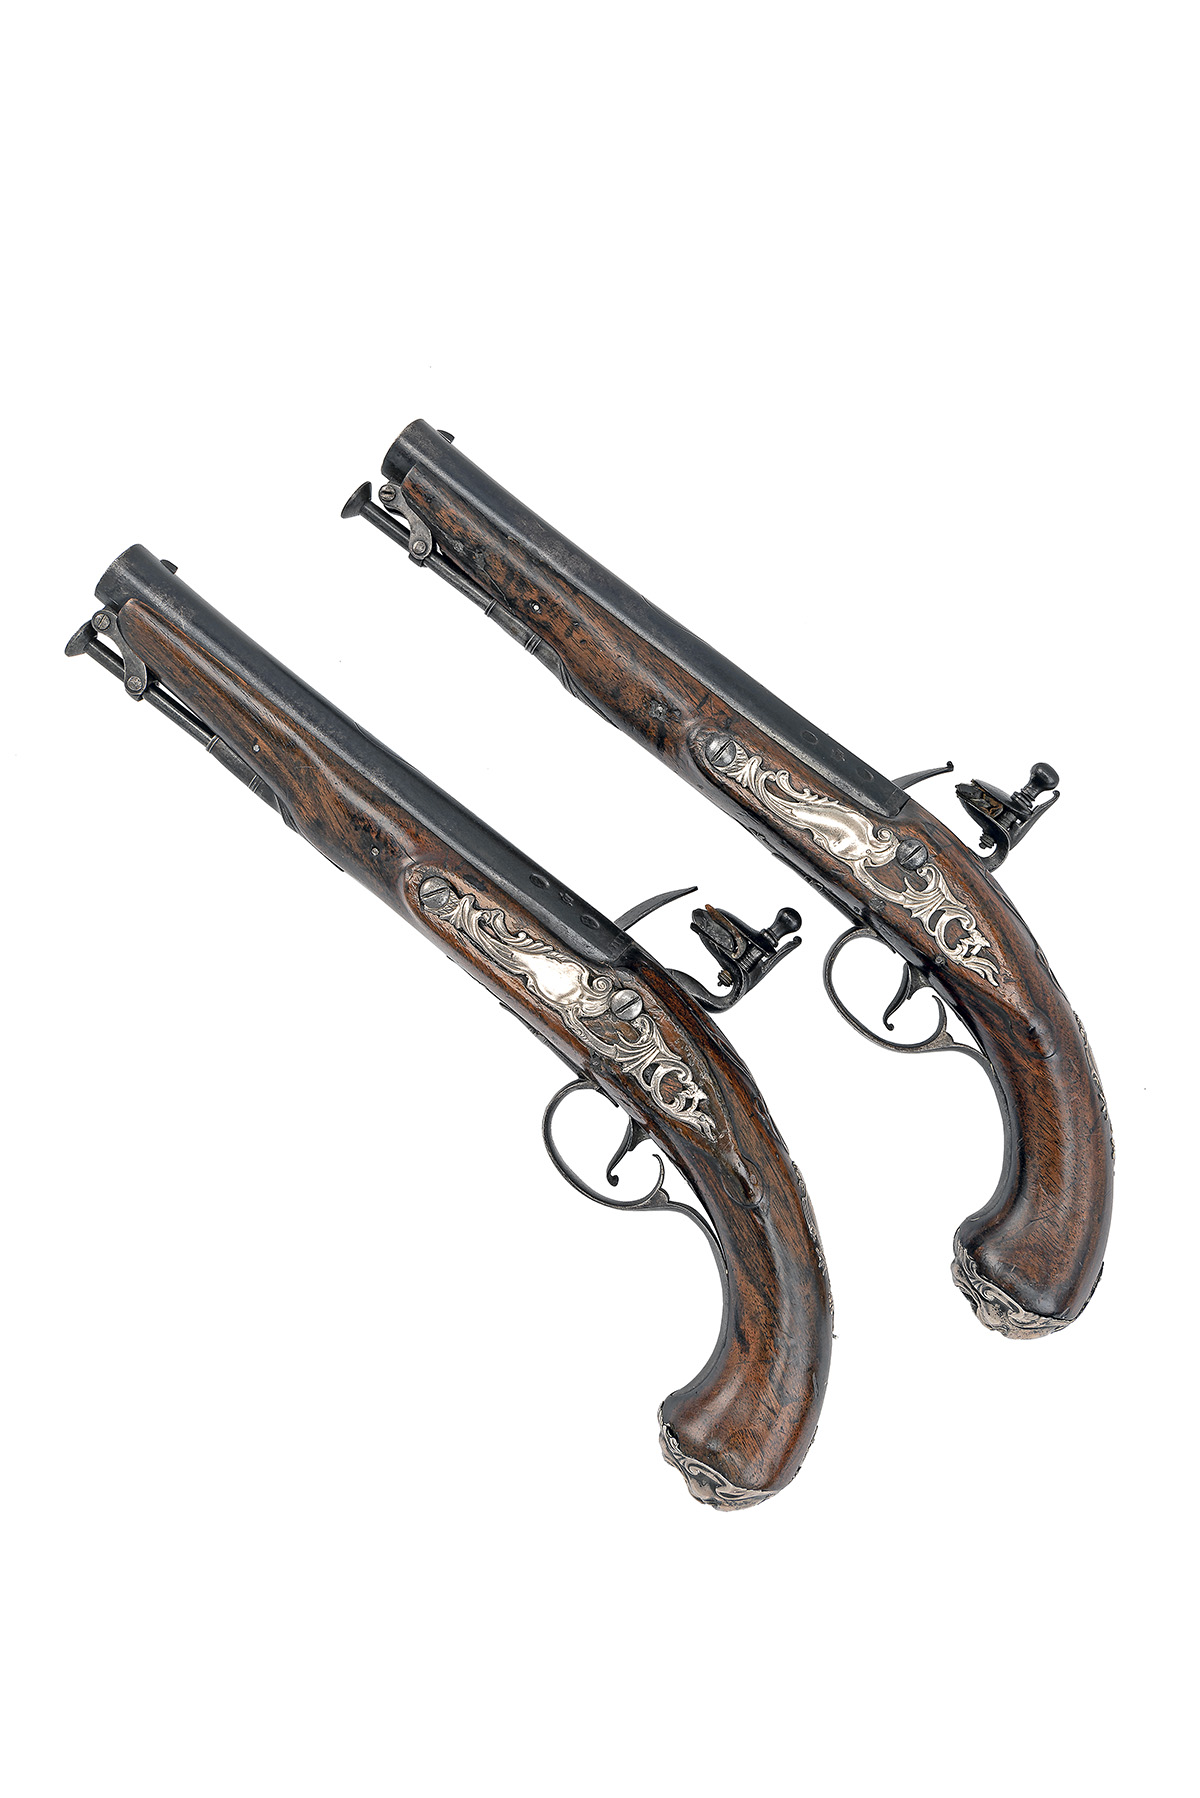 A PAIR OF SILVER-MOUNTED 22-BORE FLINTLOCK HOLSTER PISTOLS SIGNED GRIFFIN, LONDON, no visible serial - Image 2 of 4